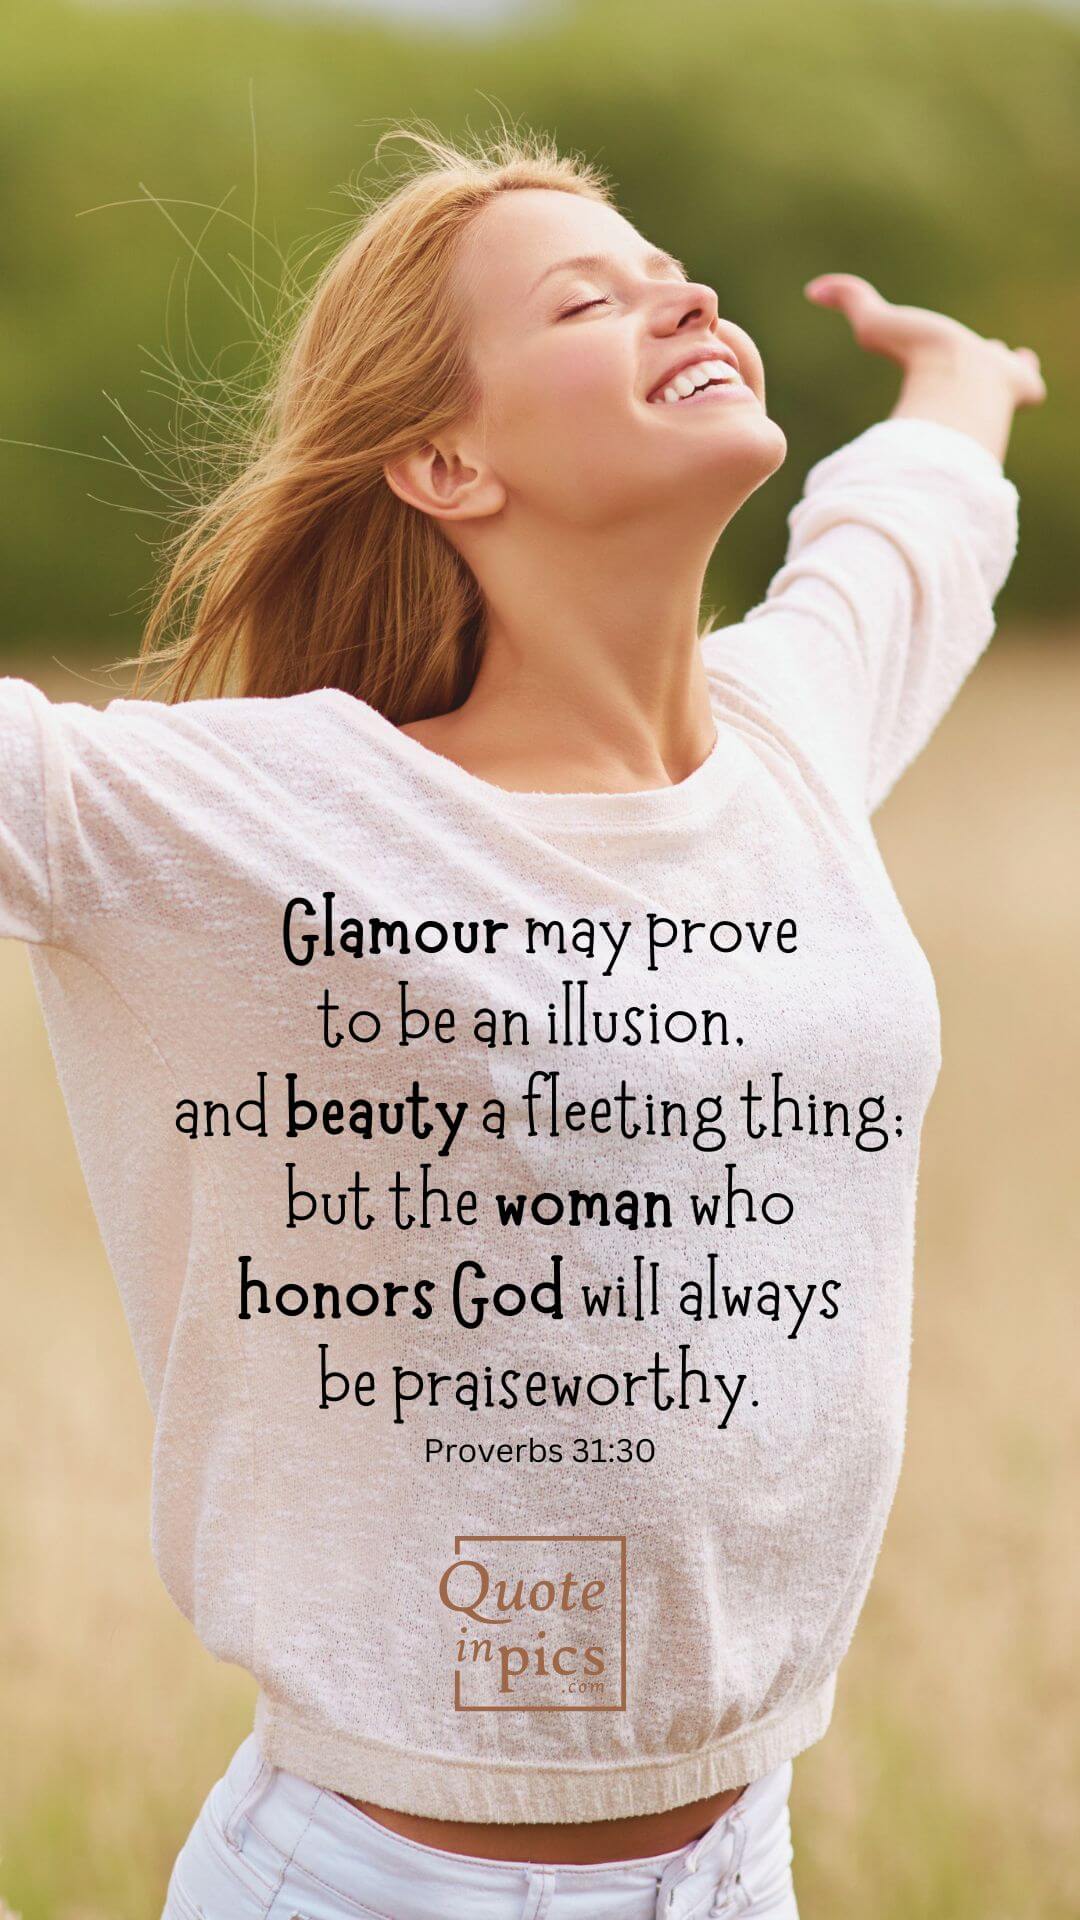 Proverbs 31:30 -  The woman who honors God